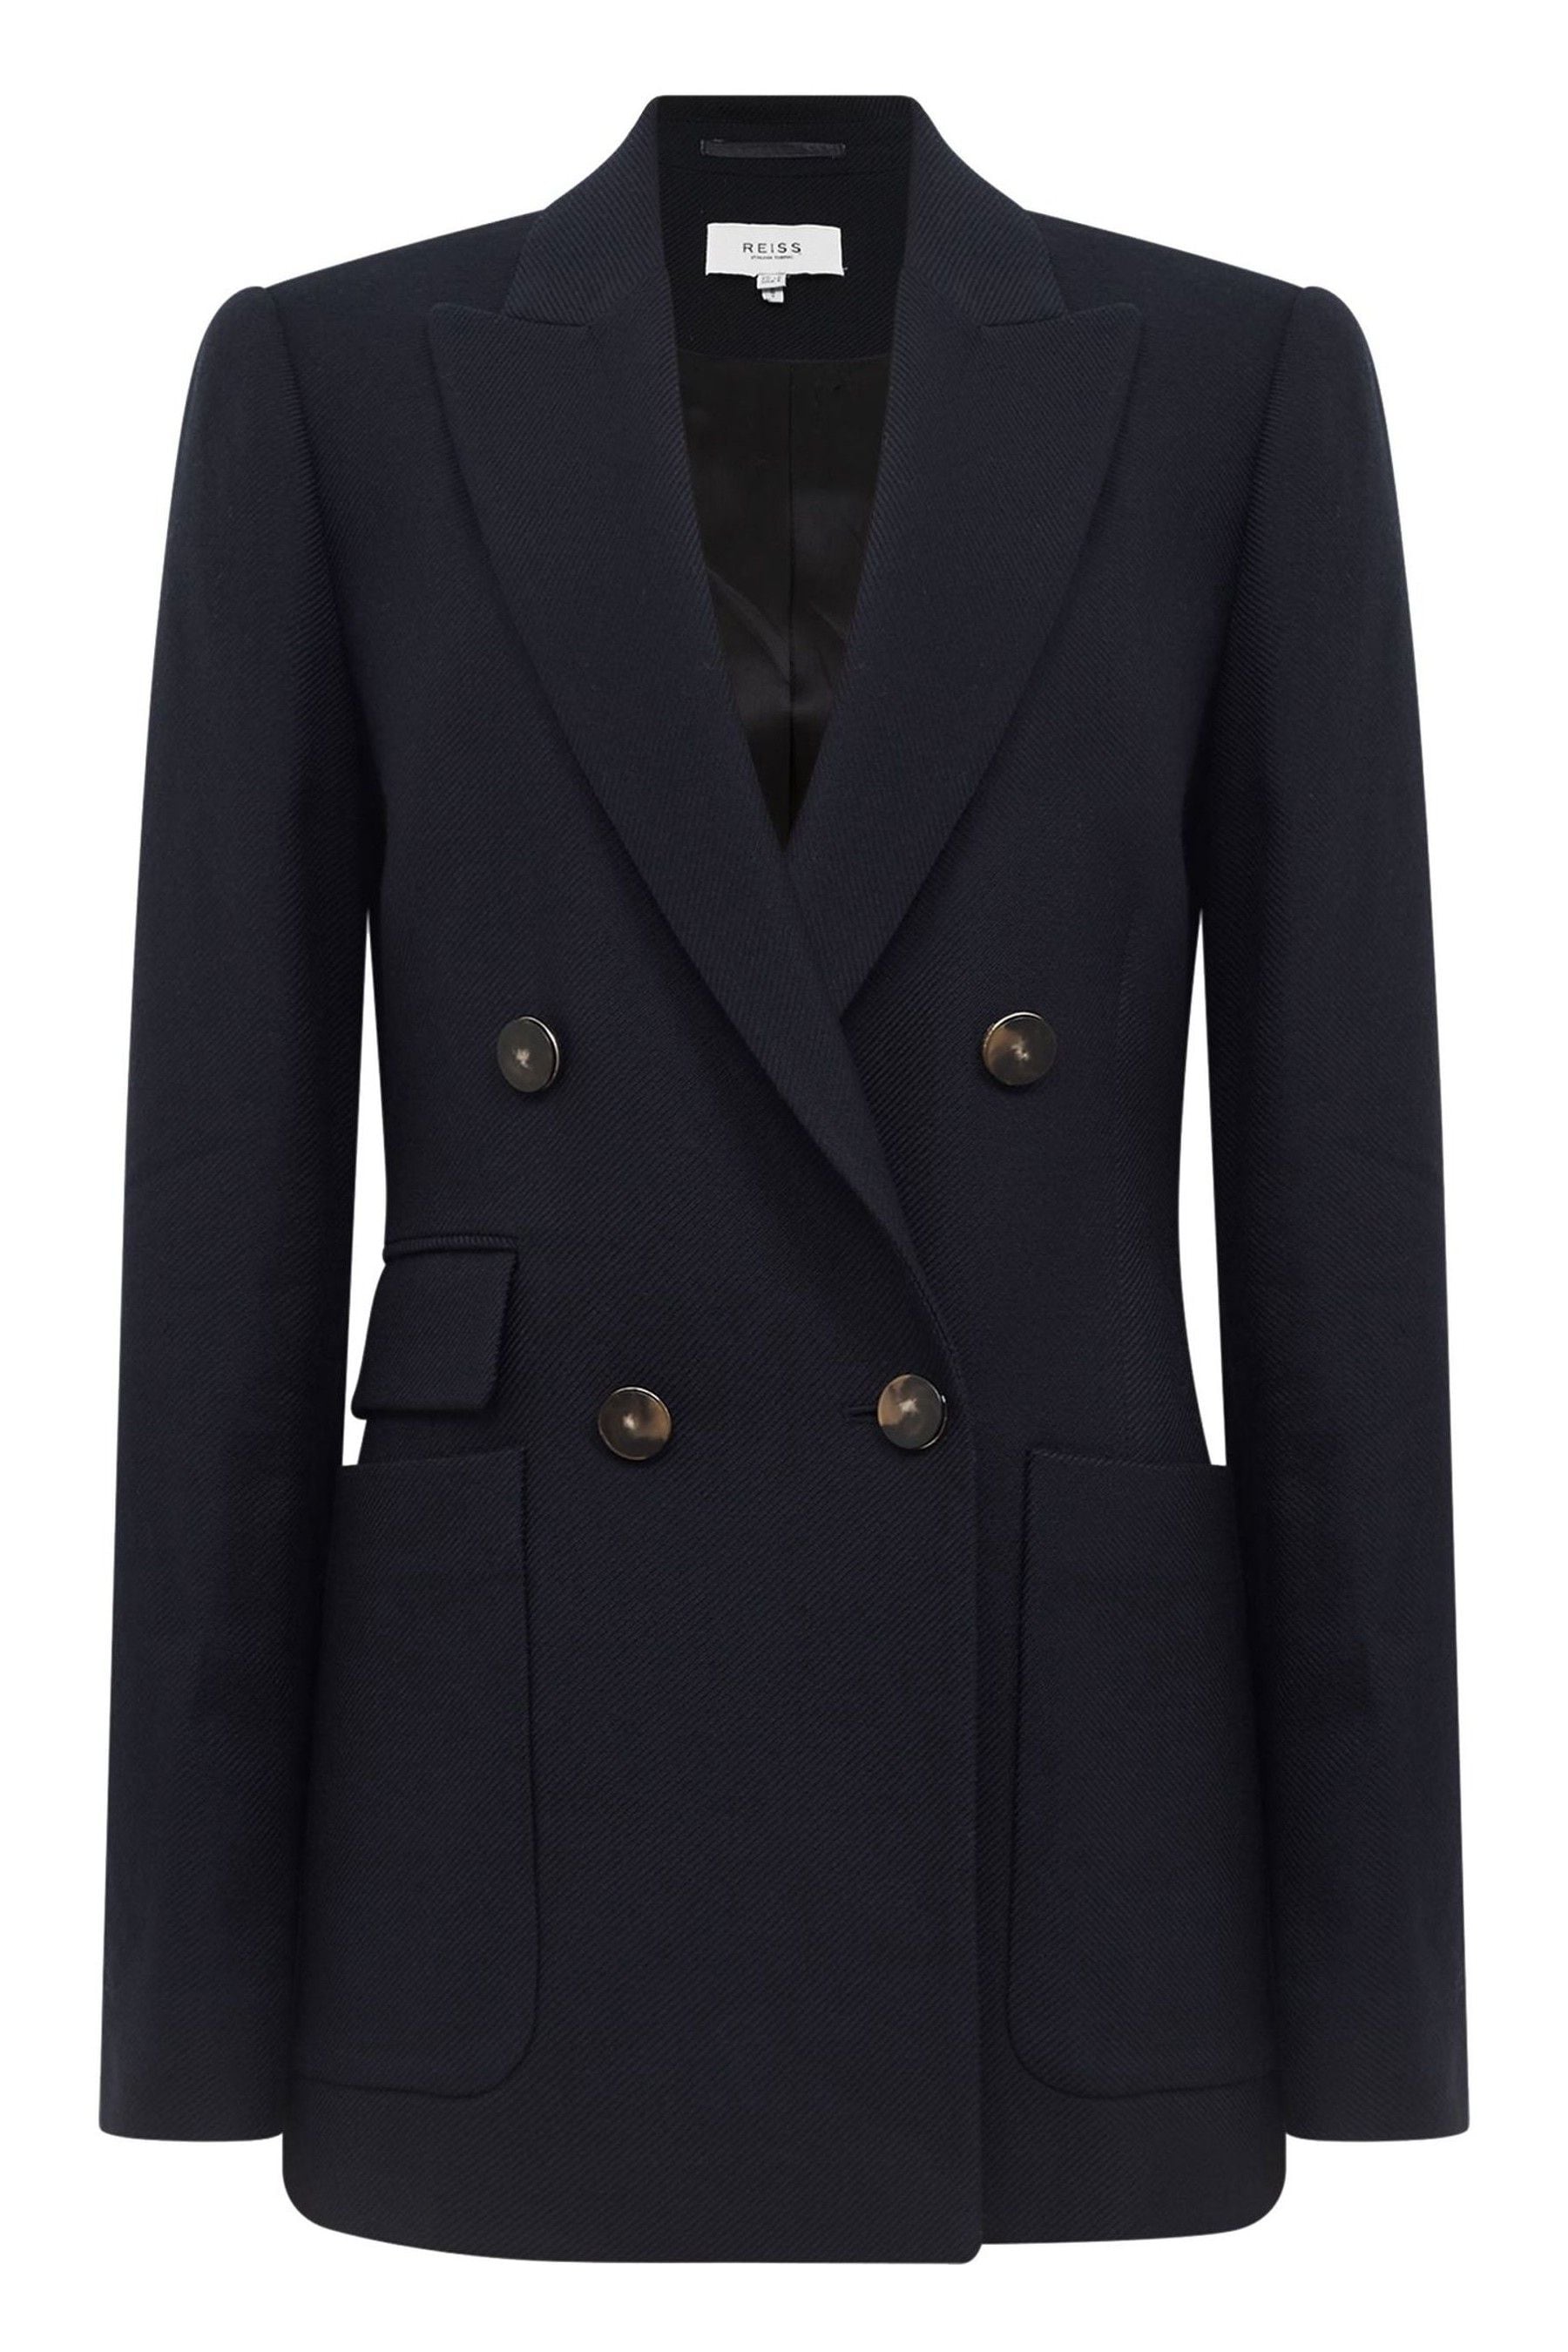 Buy Reiss Navy Larsson Double Breasted Twill Blazer from the Next UK ...